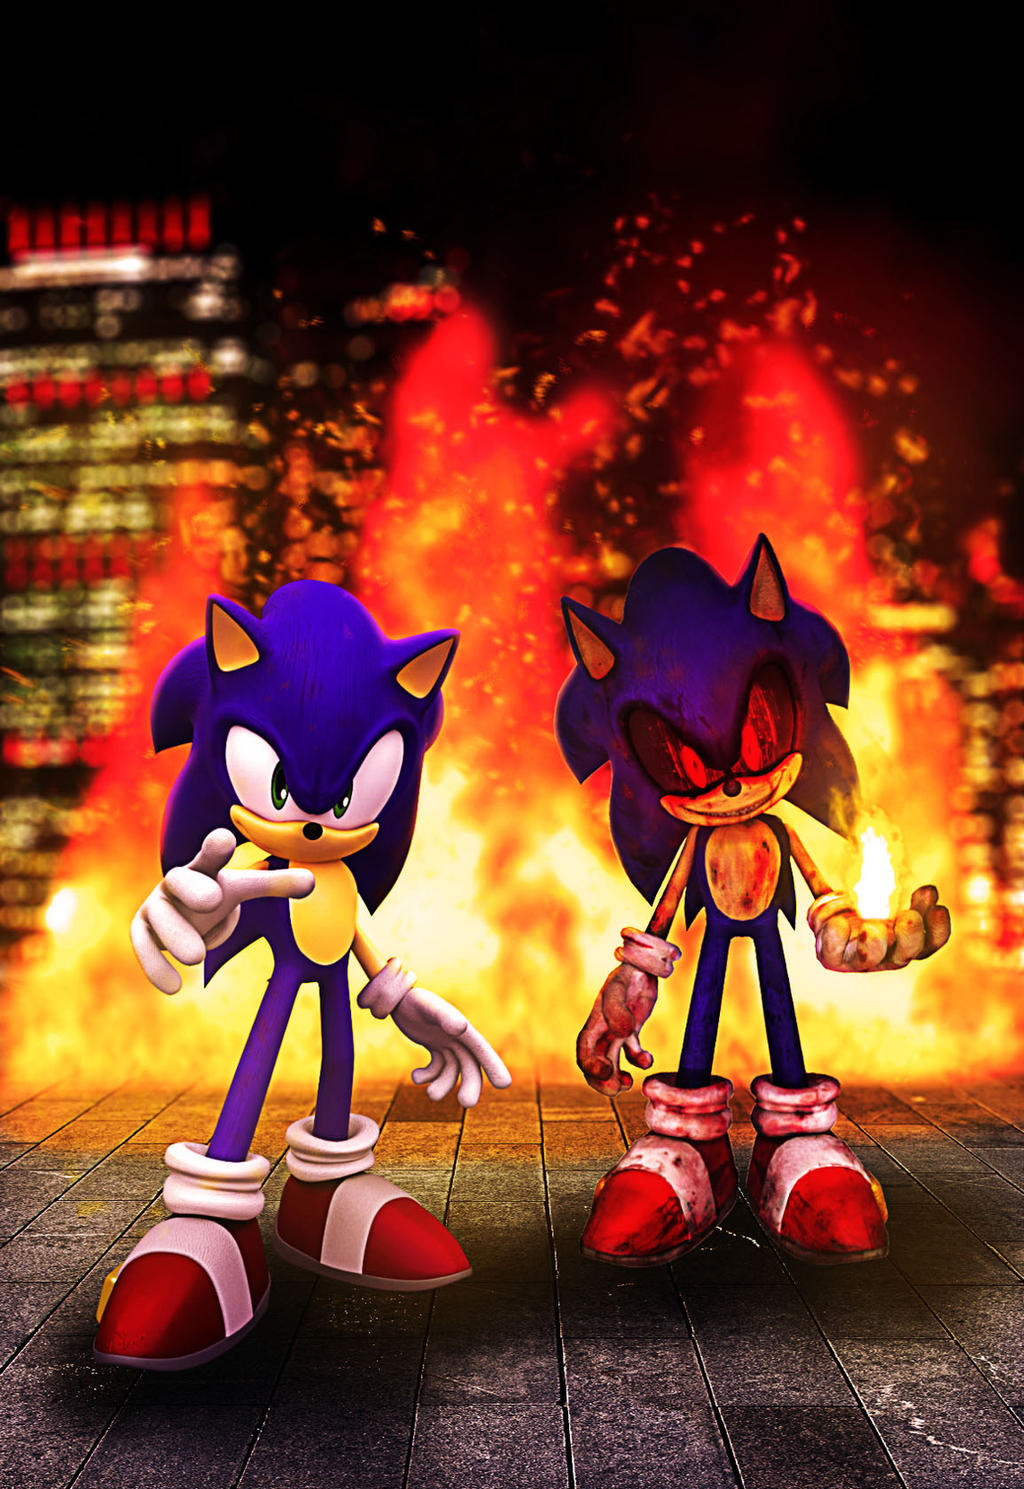 Sonic and knuckles vs one last round exe by shadowXcode on DeviantArt